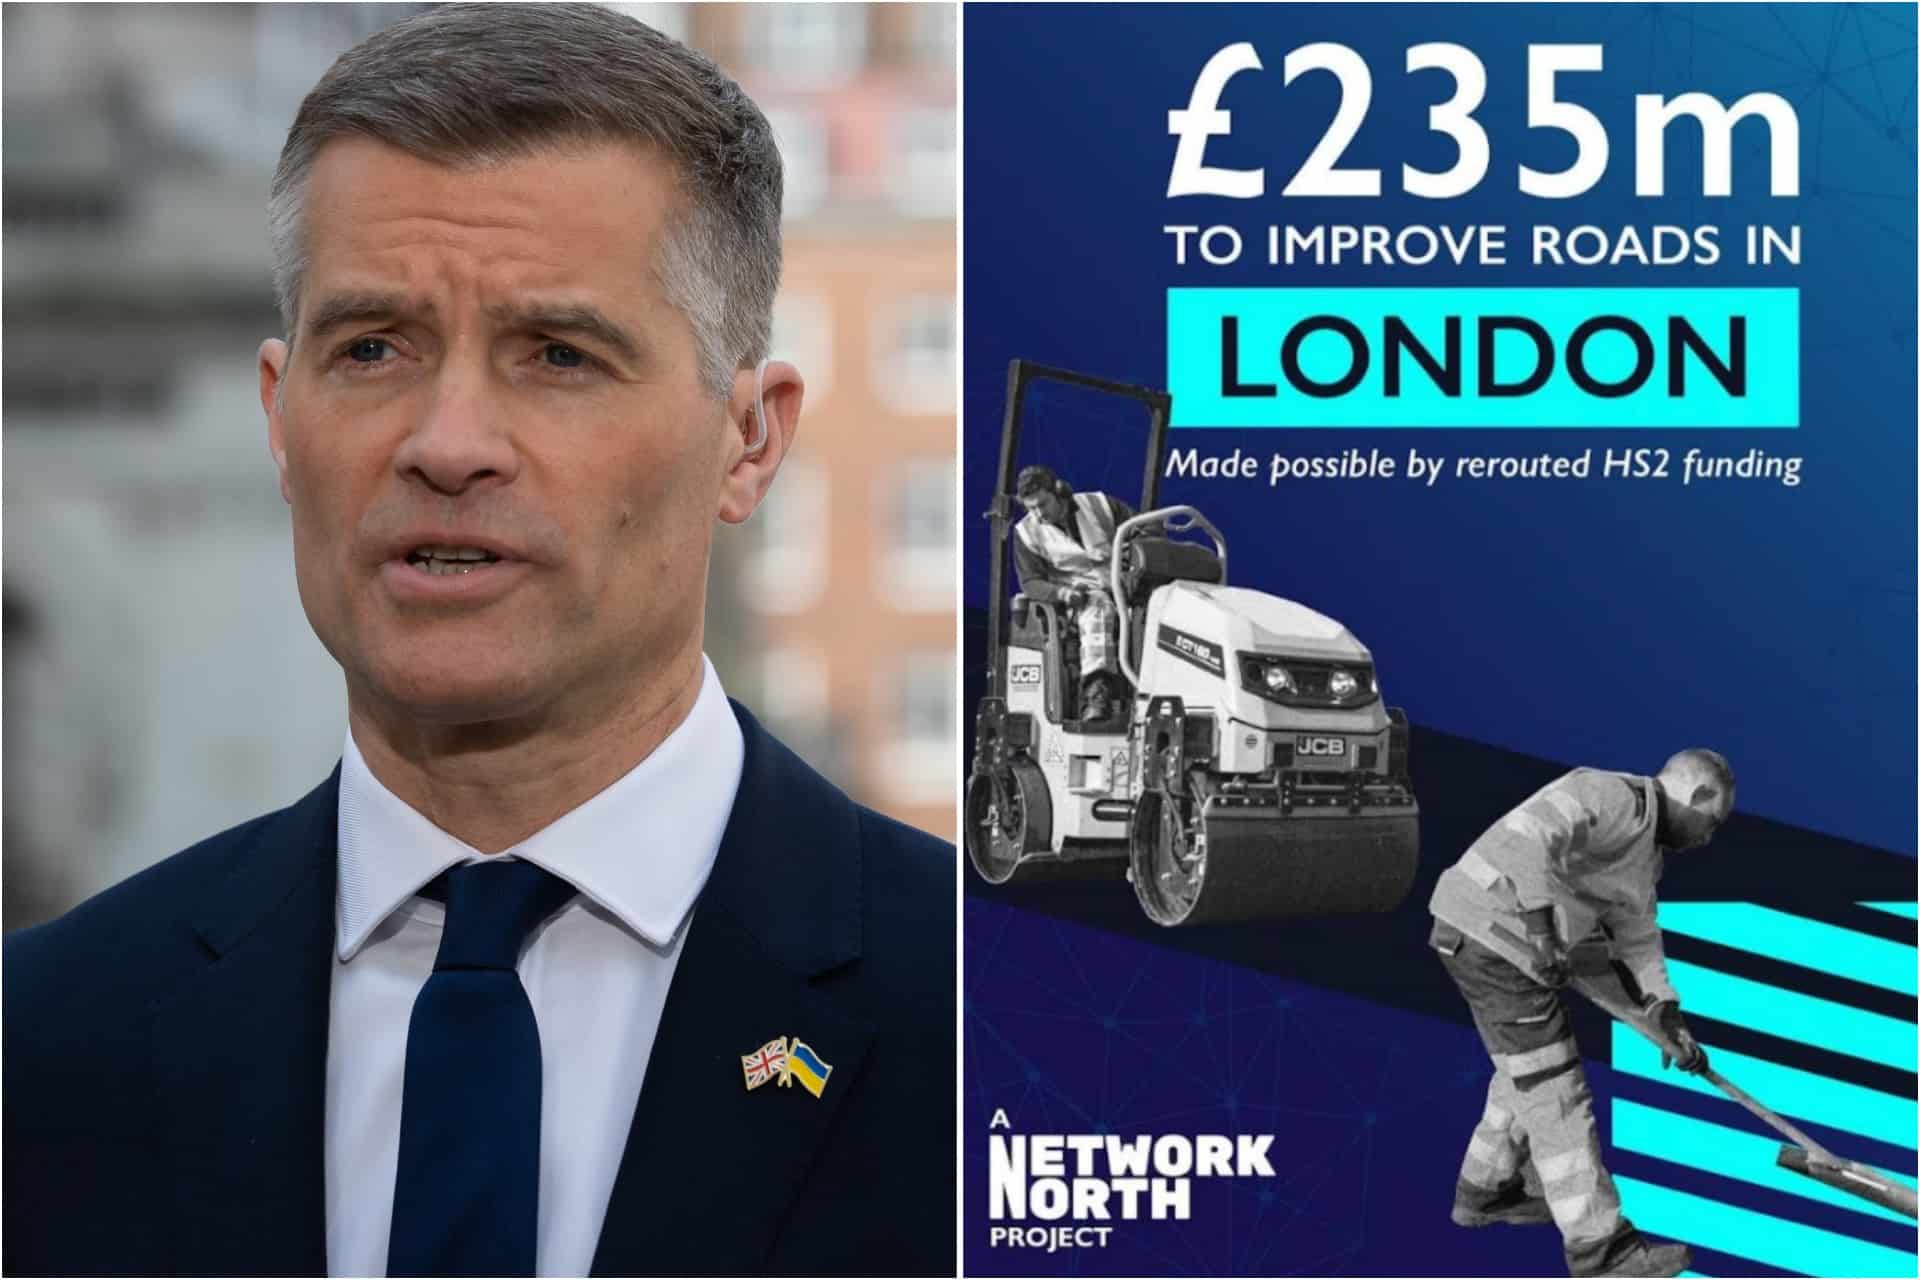 Ministers brag as Network North funds used to fix roads… in London